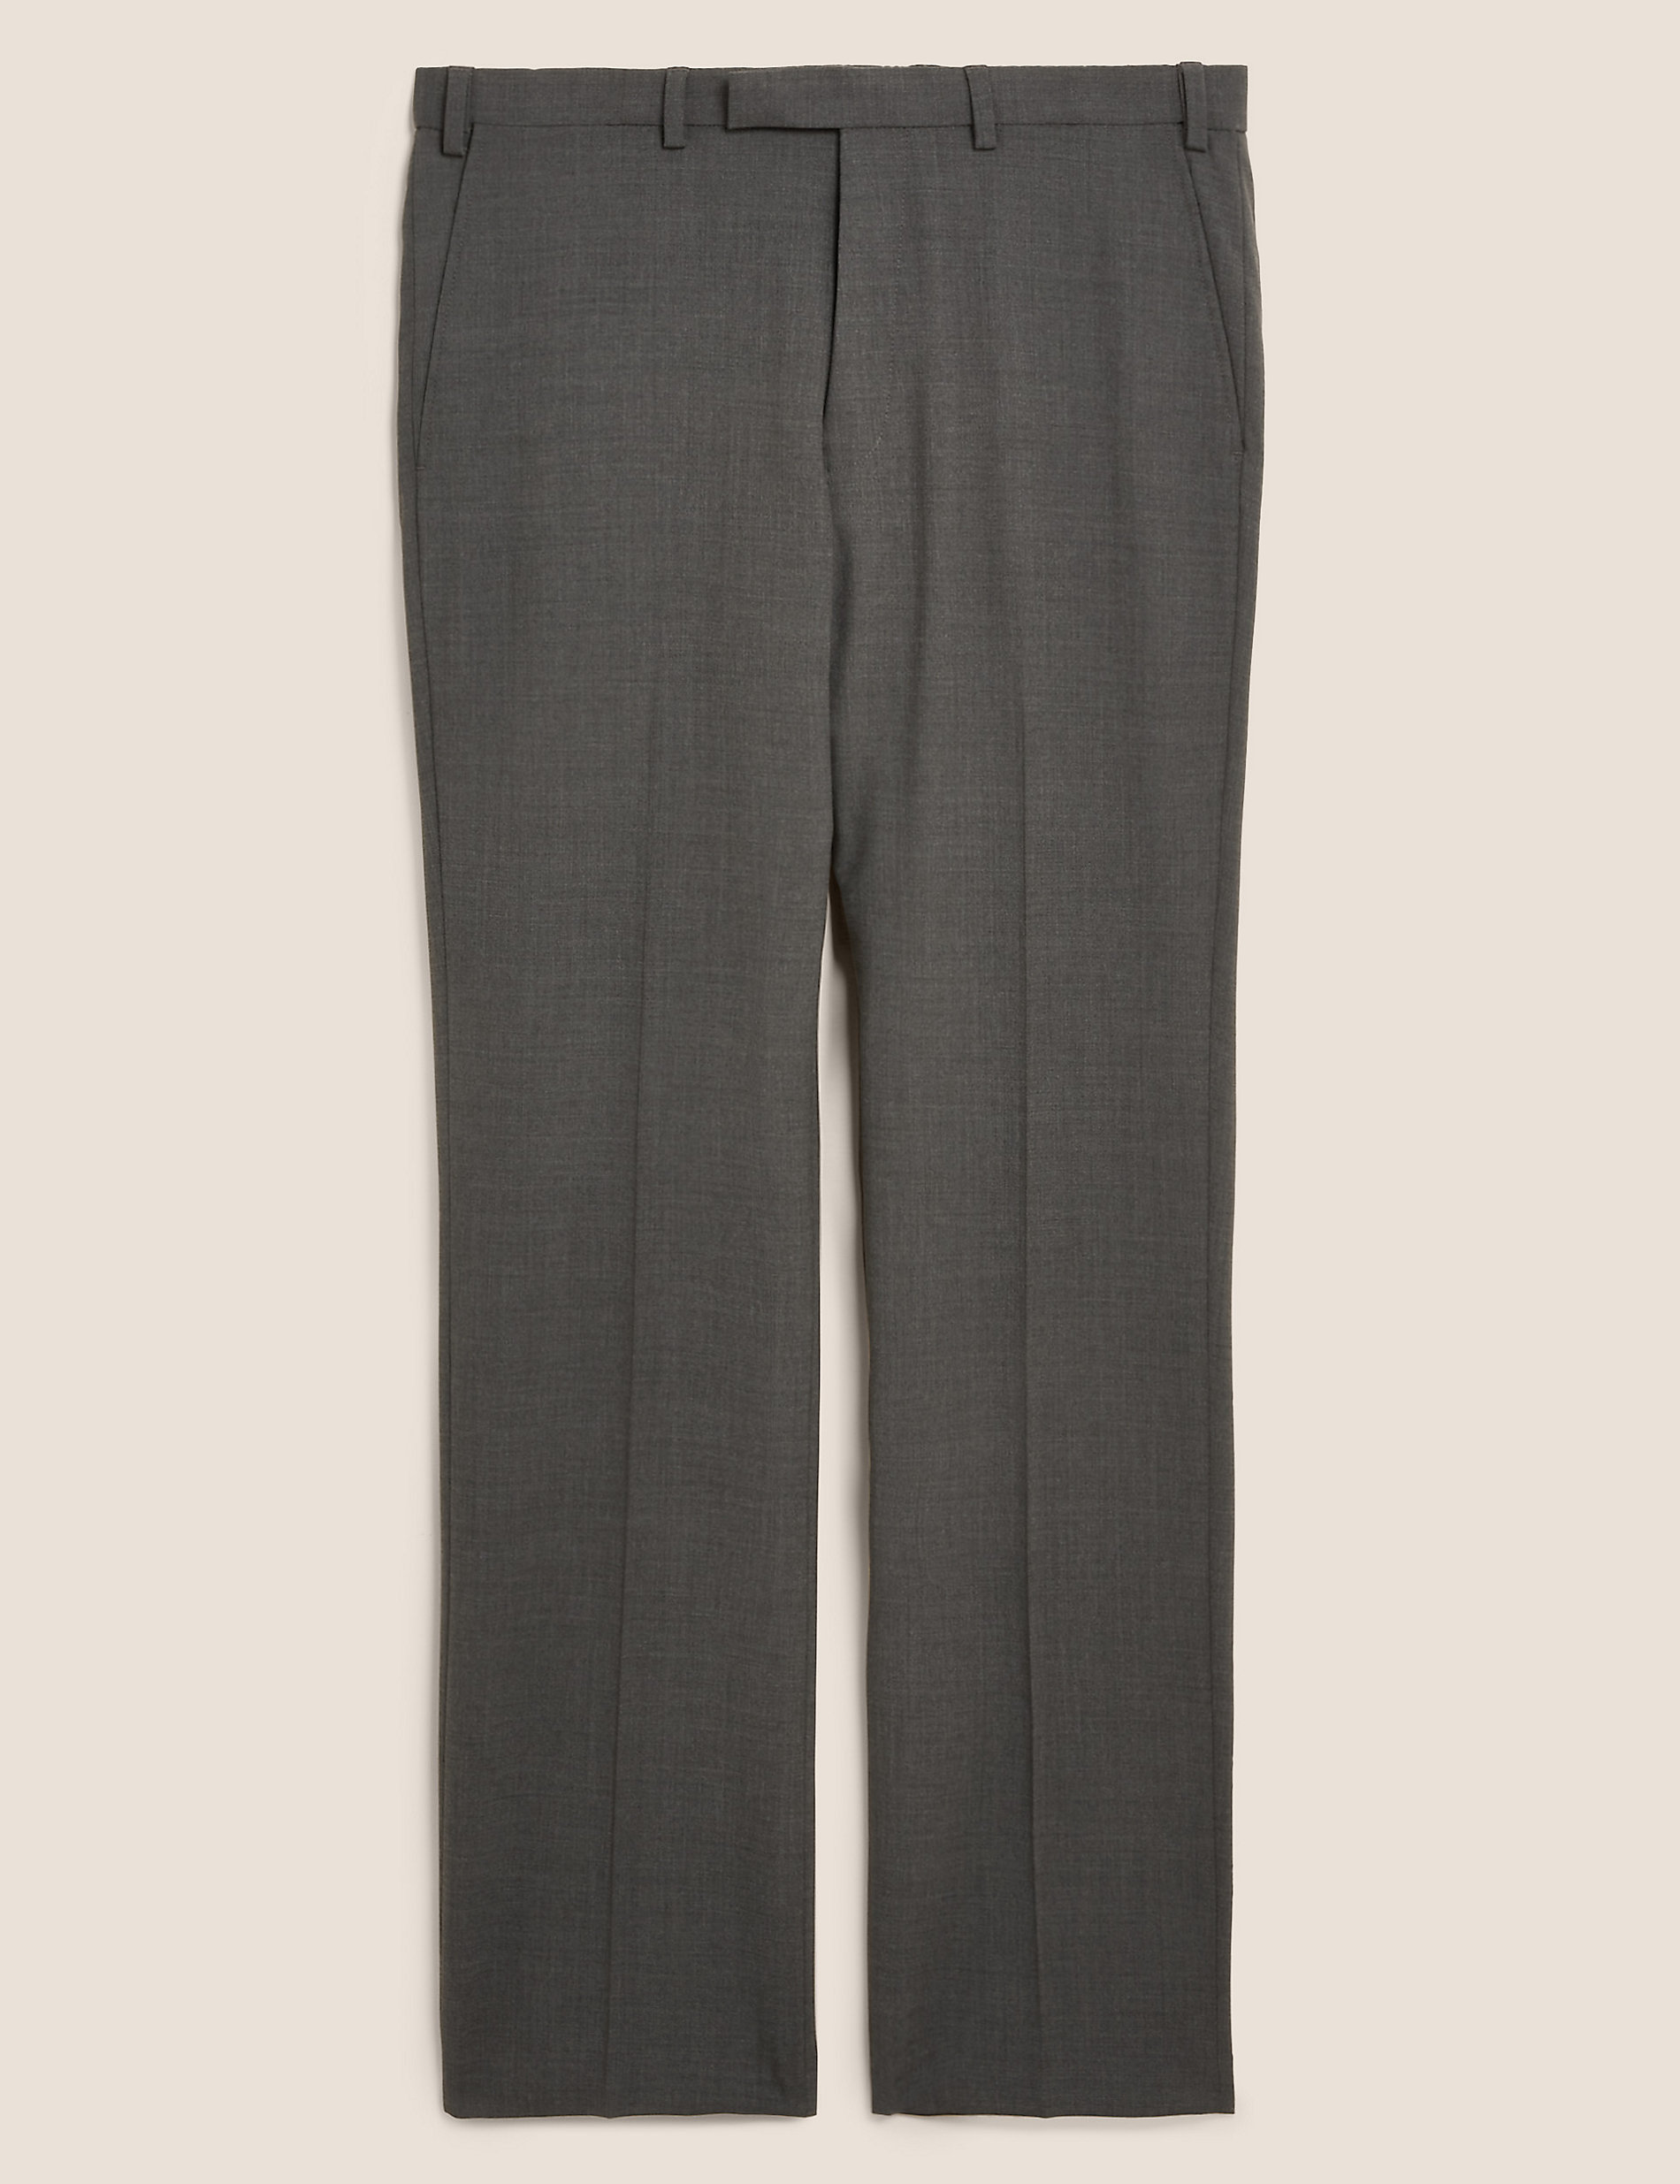 The Ultimate Regular Fit Suit Trousers